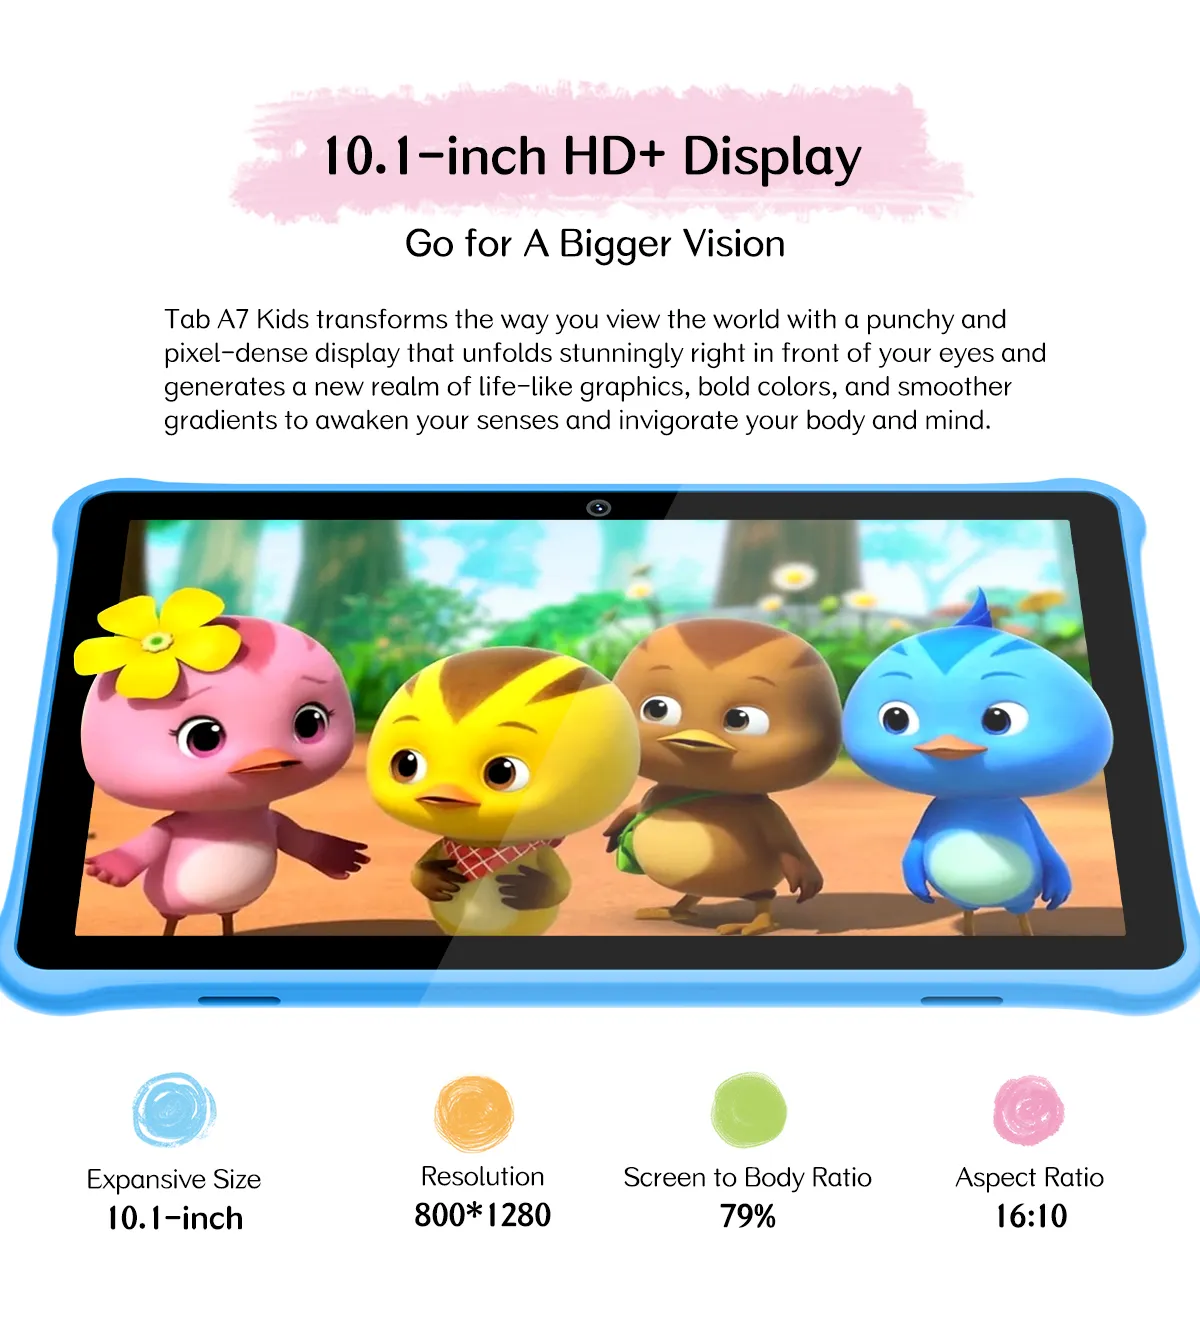 Blackview Tab A7 Kids Tablets Study Tablet PC